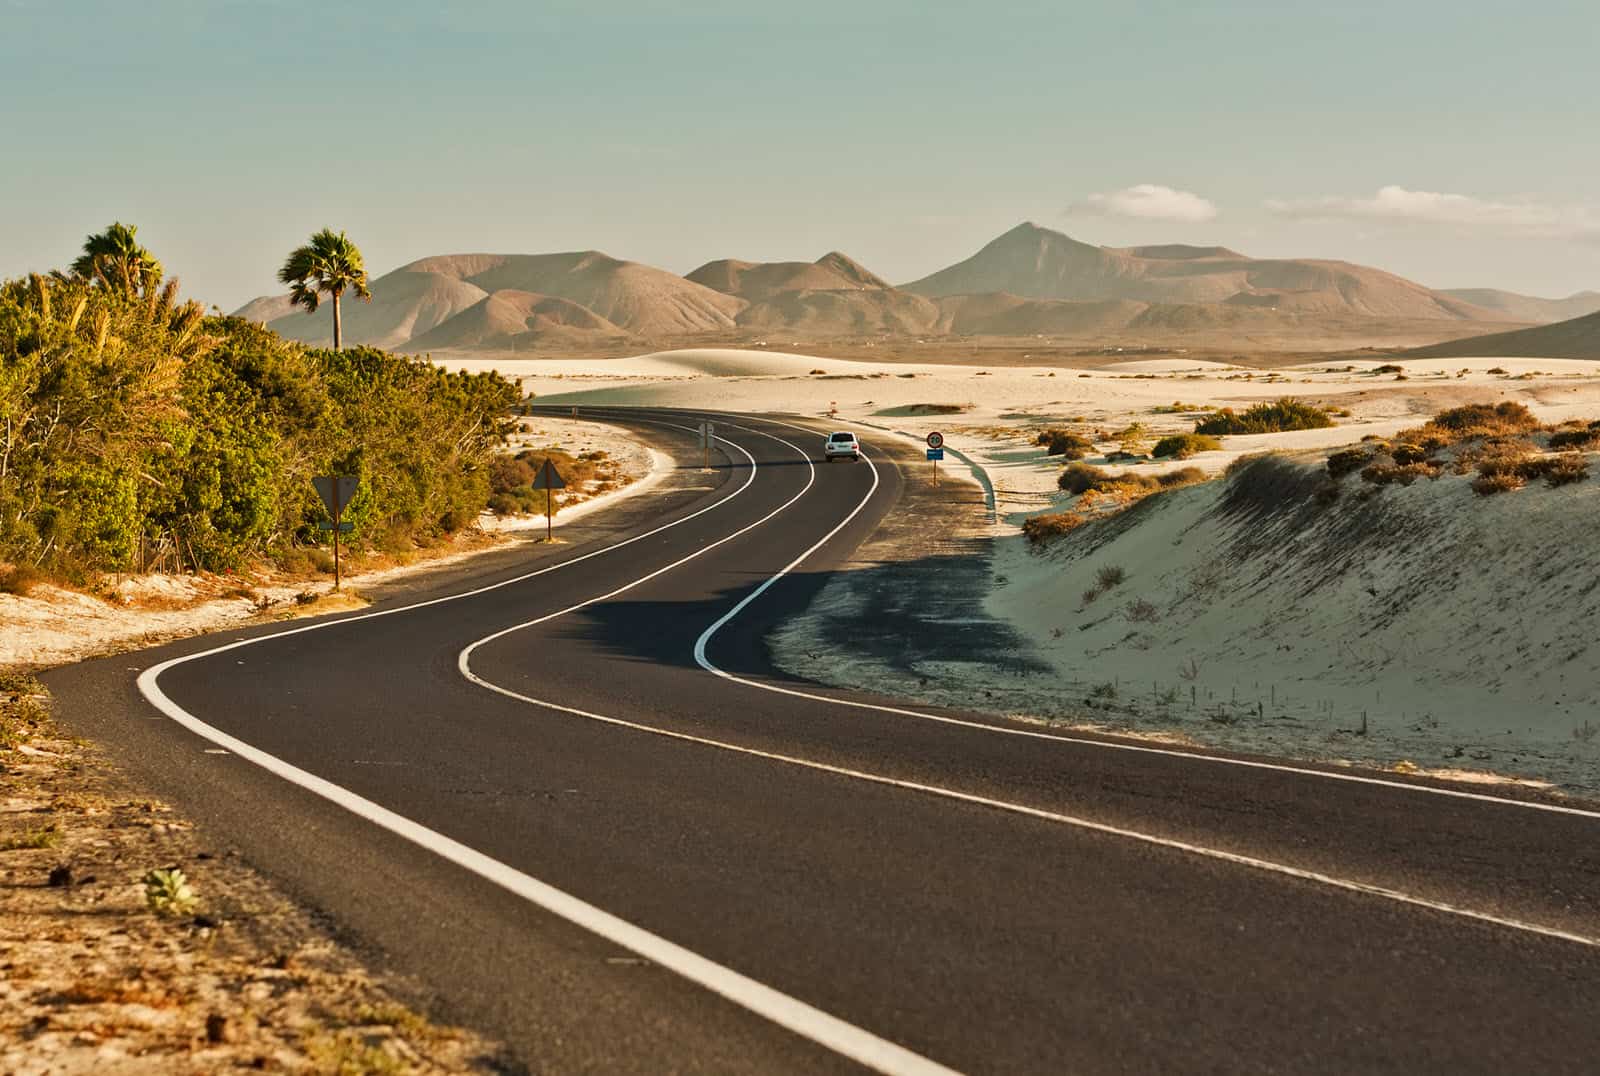 Image of winding road in a desert setting